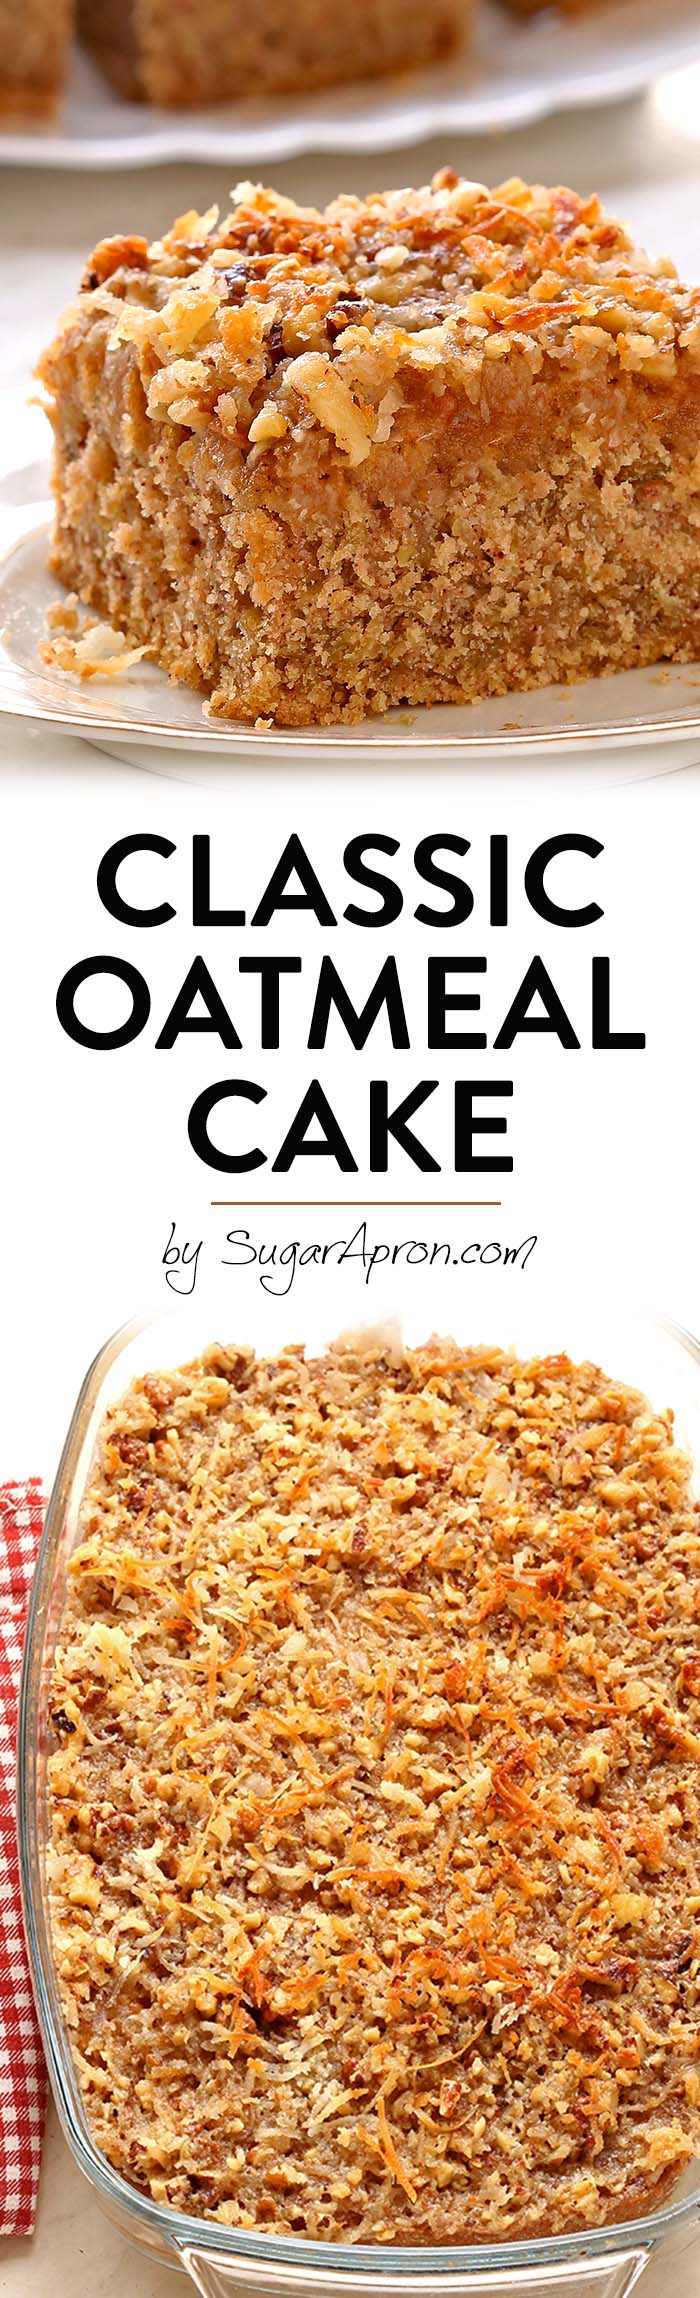 Classic Oatmeal Cake is an soft, delicately spiced old-fashioned cake made with rolled oats and a delicious caramelized coconut pecan topping. 